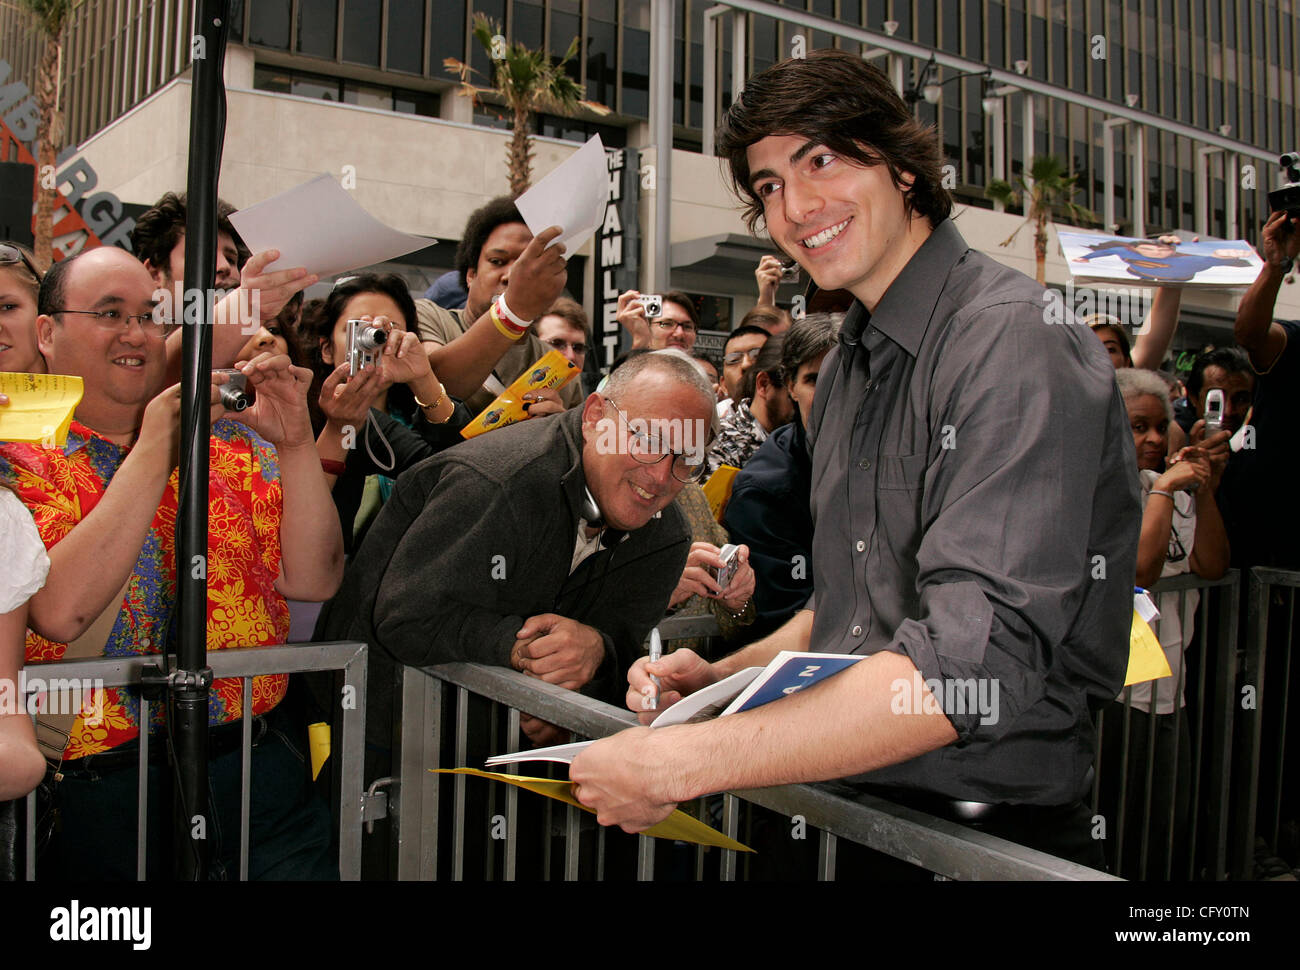 May 1, 2007 - Hollywood, California, USA - Actor BRANDON ROUTH joins Producer JON PETERS as he receives star on Walk of Fame. (Credit Image: © Lisa O'Connor/ZUMA Press) Stock Photo